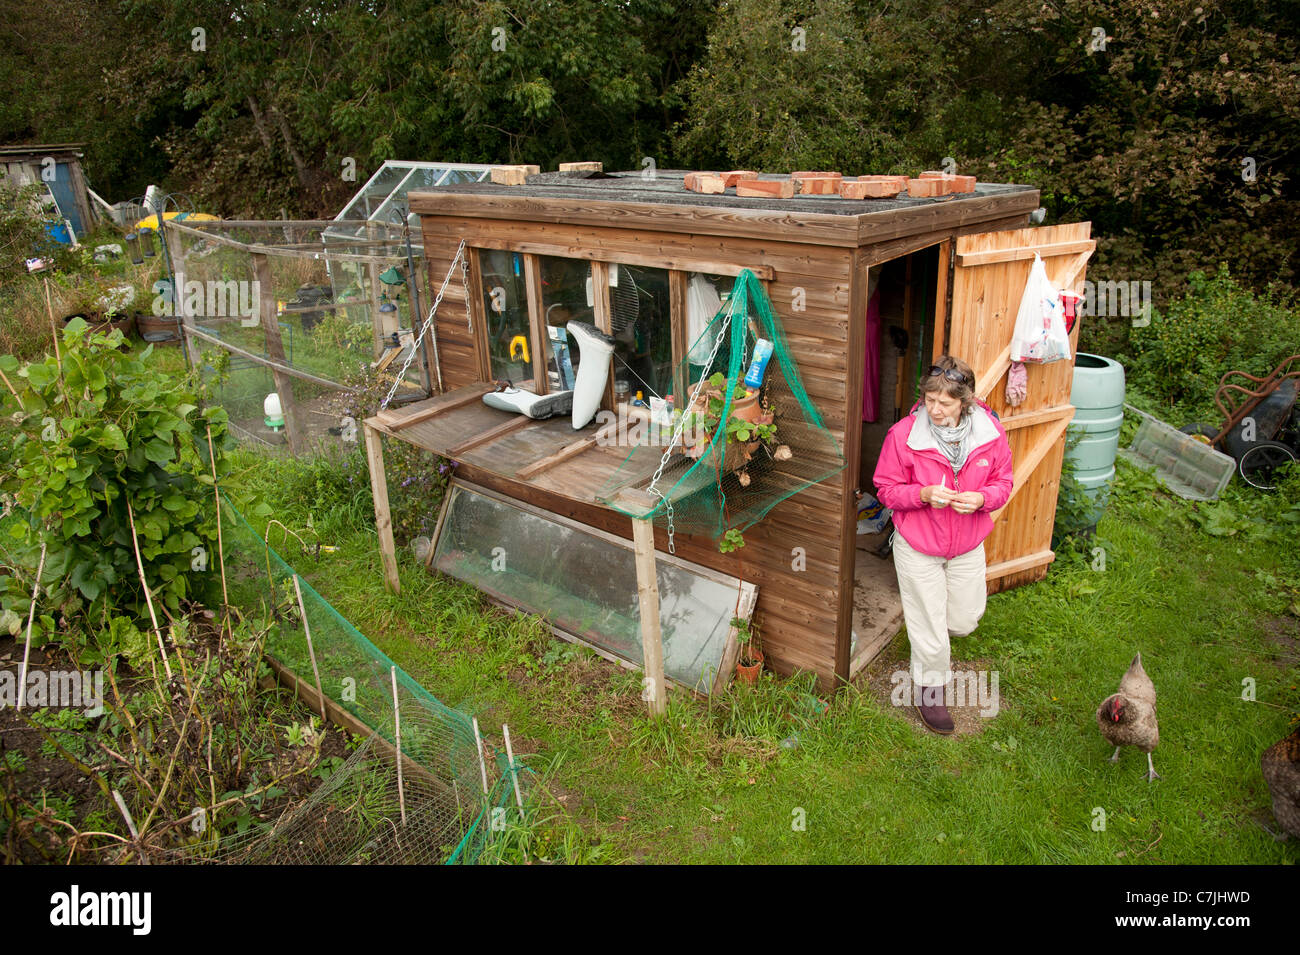 A middle aged woman on her allotment garden Aberystwyth Wales UK Stock Photo